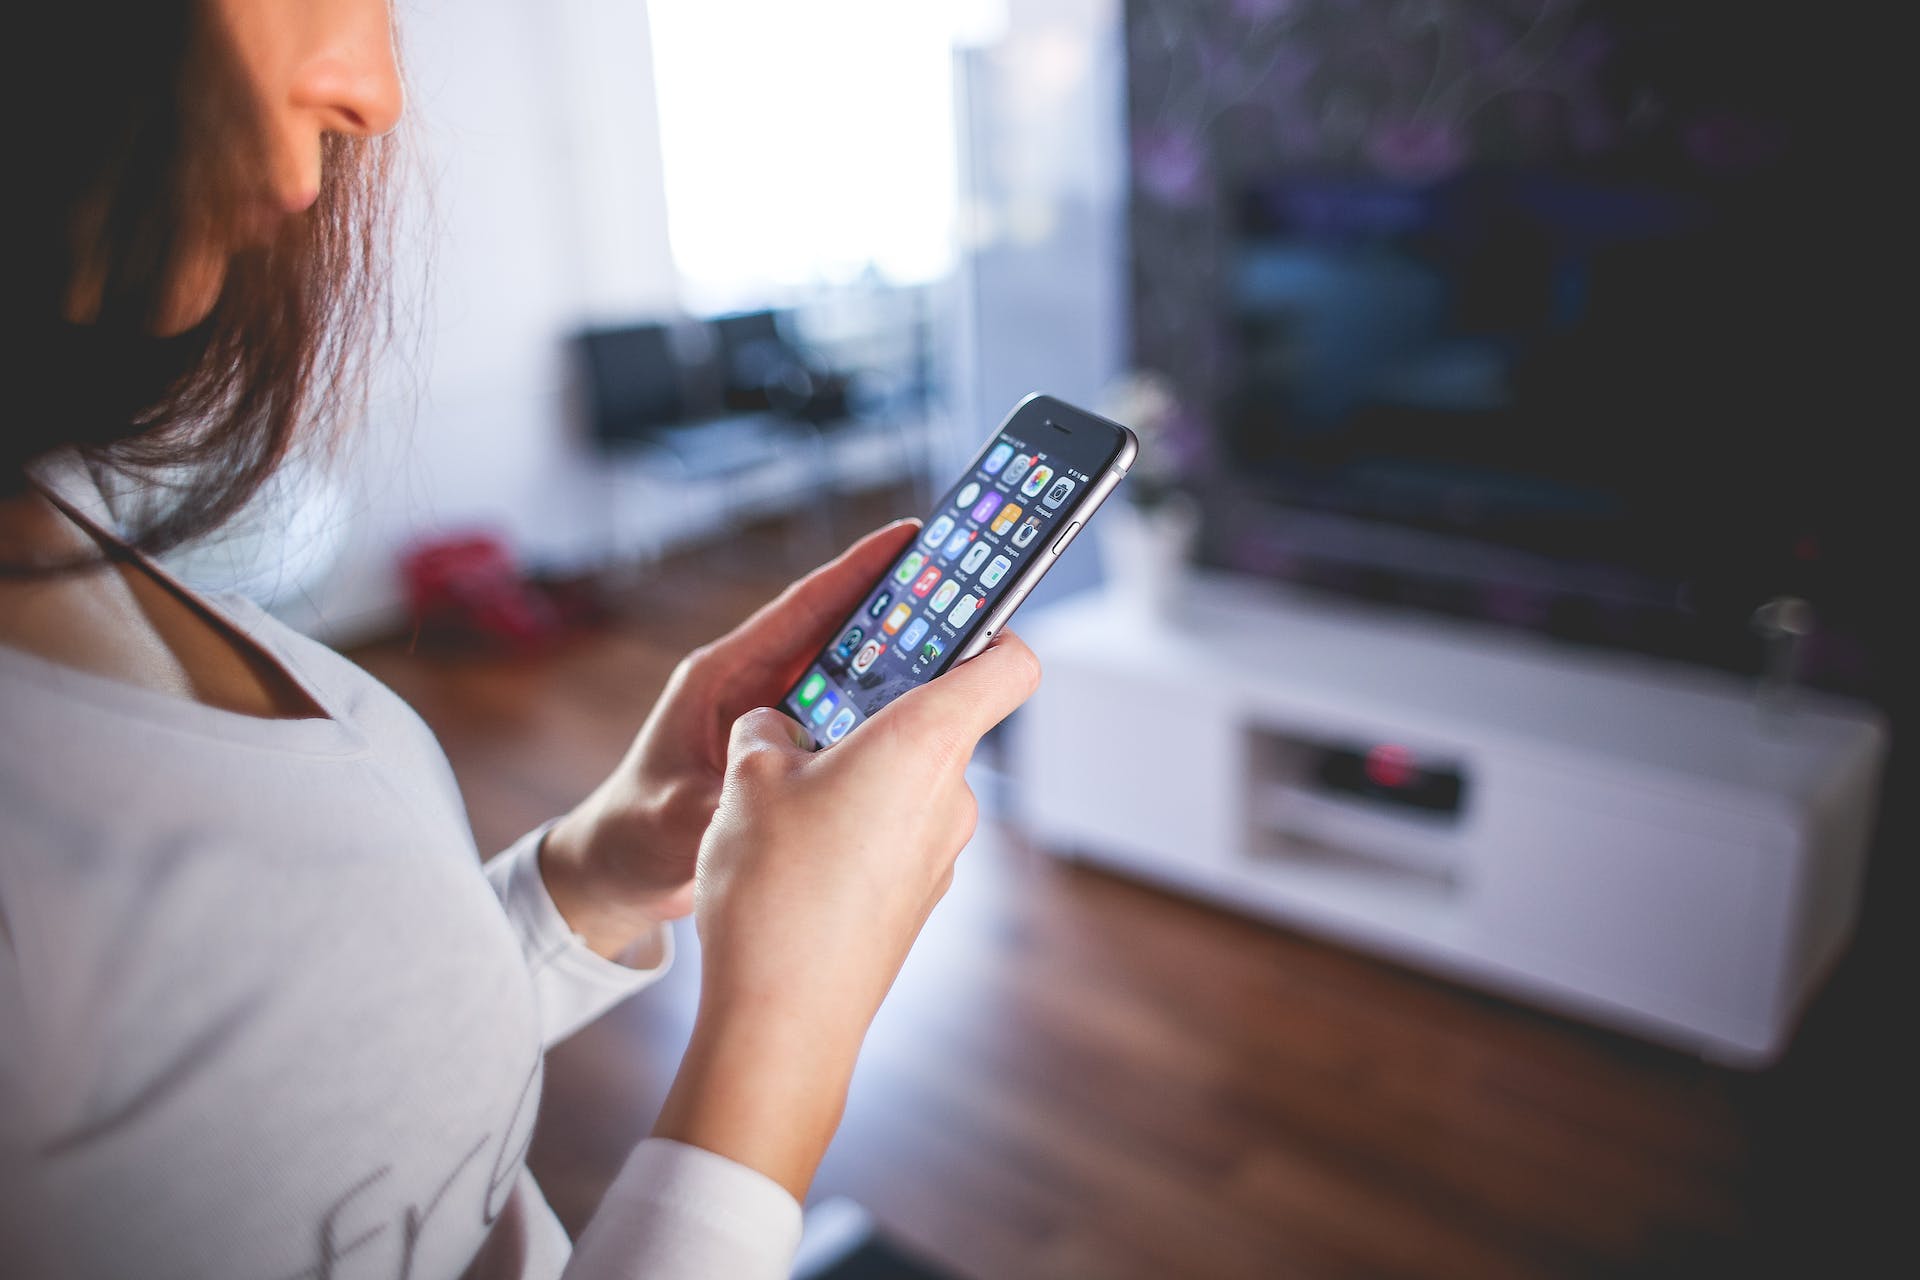 A woman scrolling on a smart phone | Source: Pexels